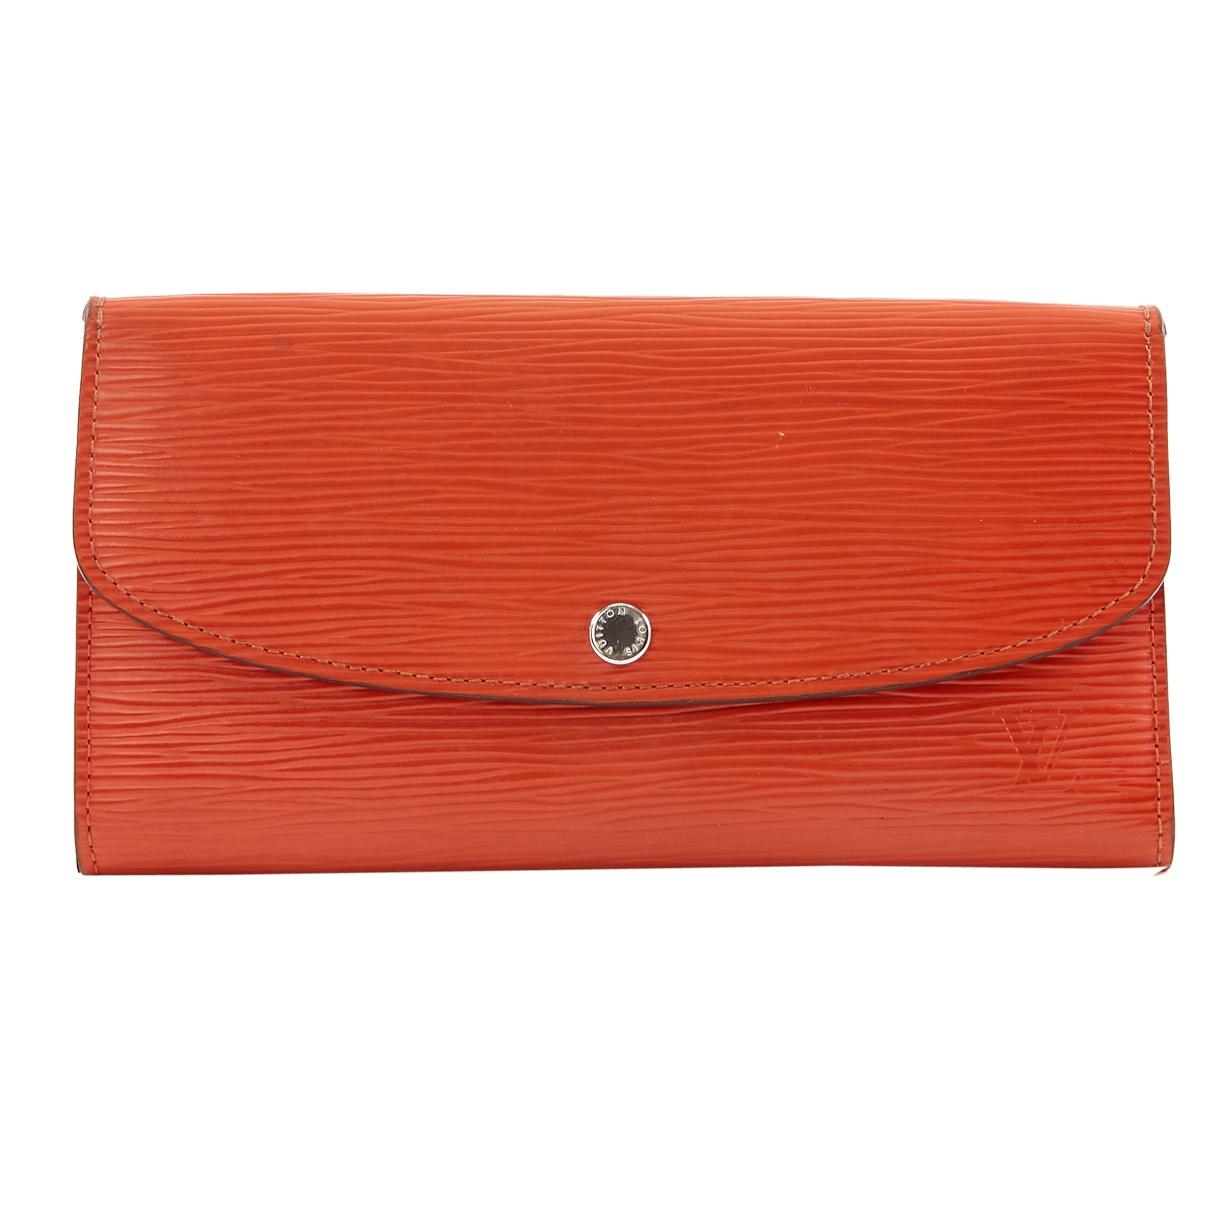 Lyst - Louis Vuitton Leather Card Wallet in Orange - Save 24%